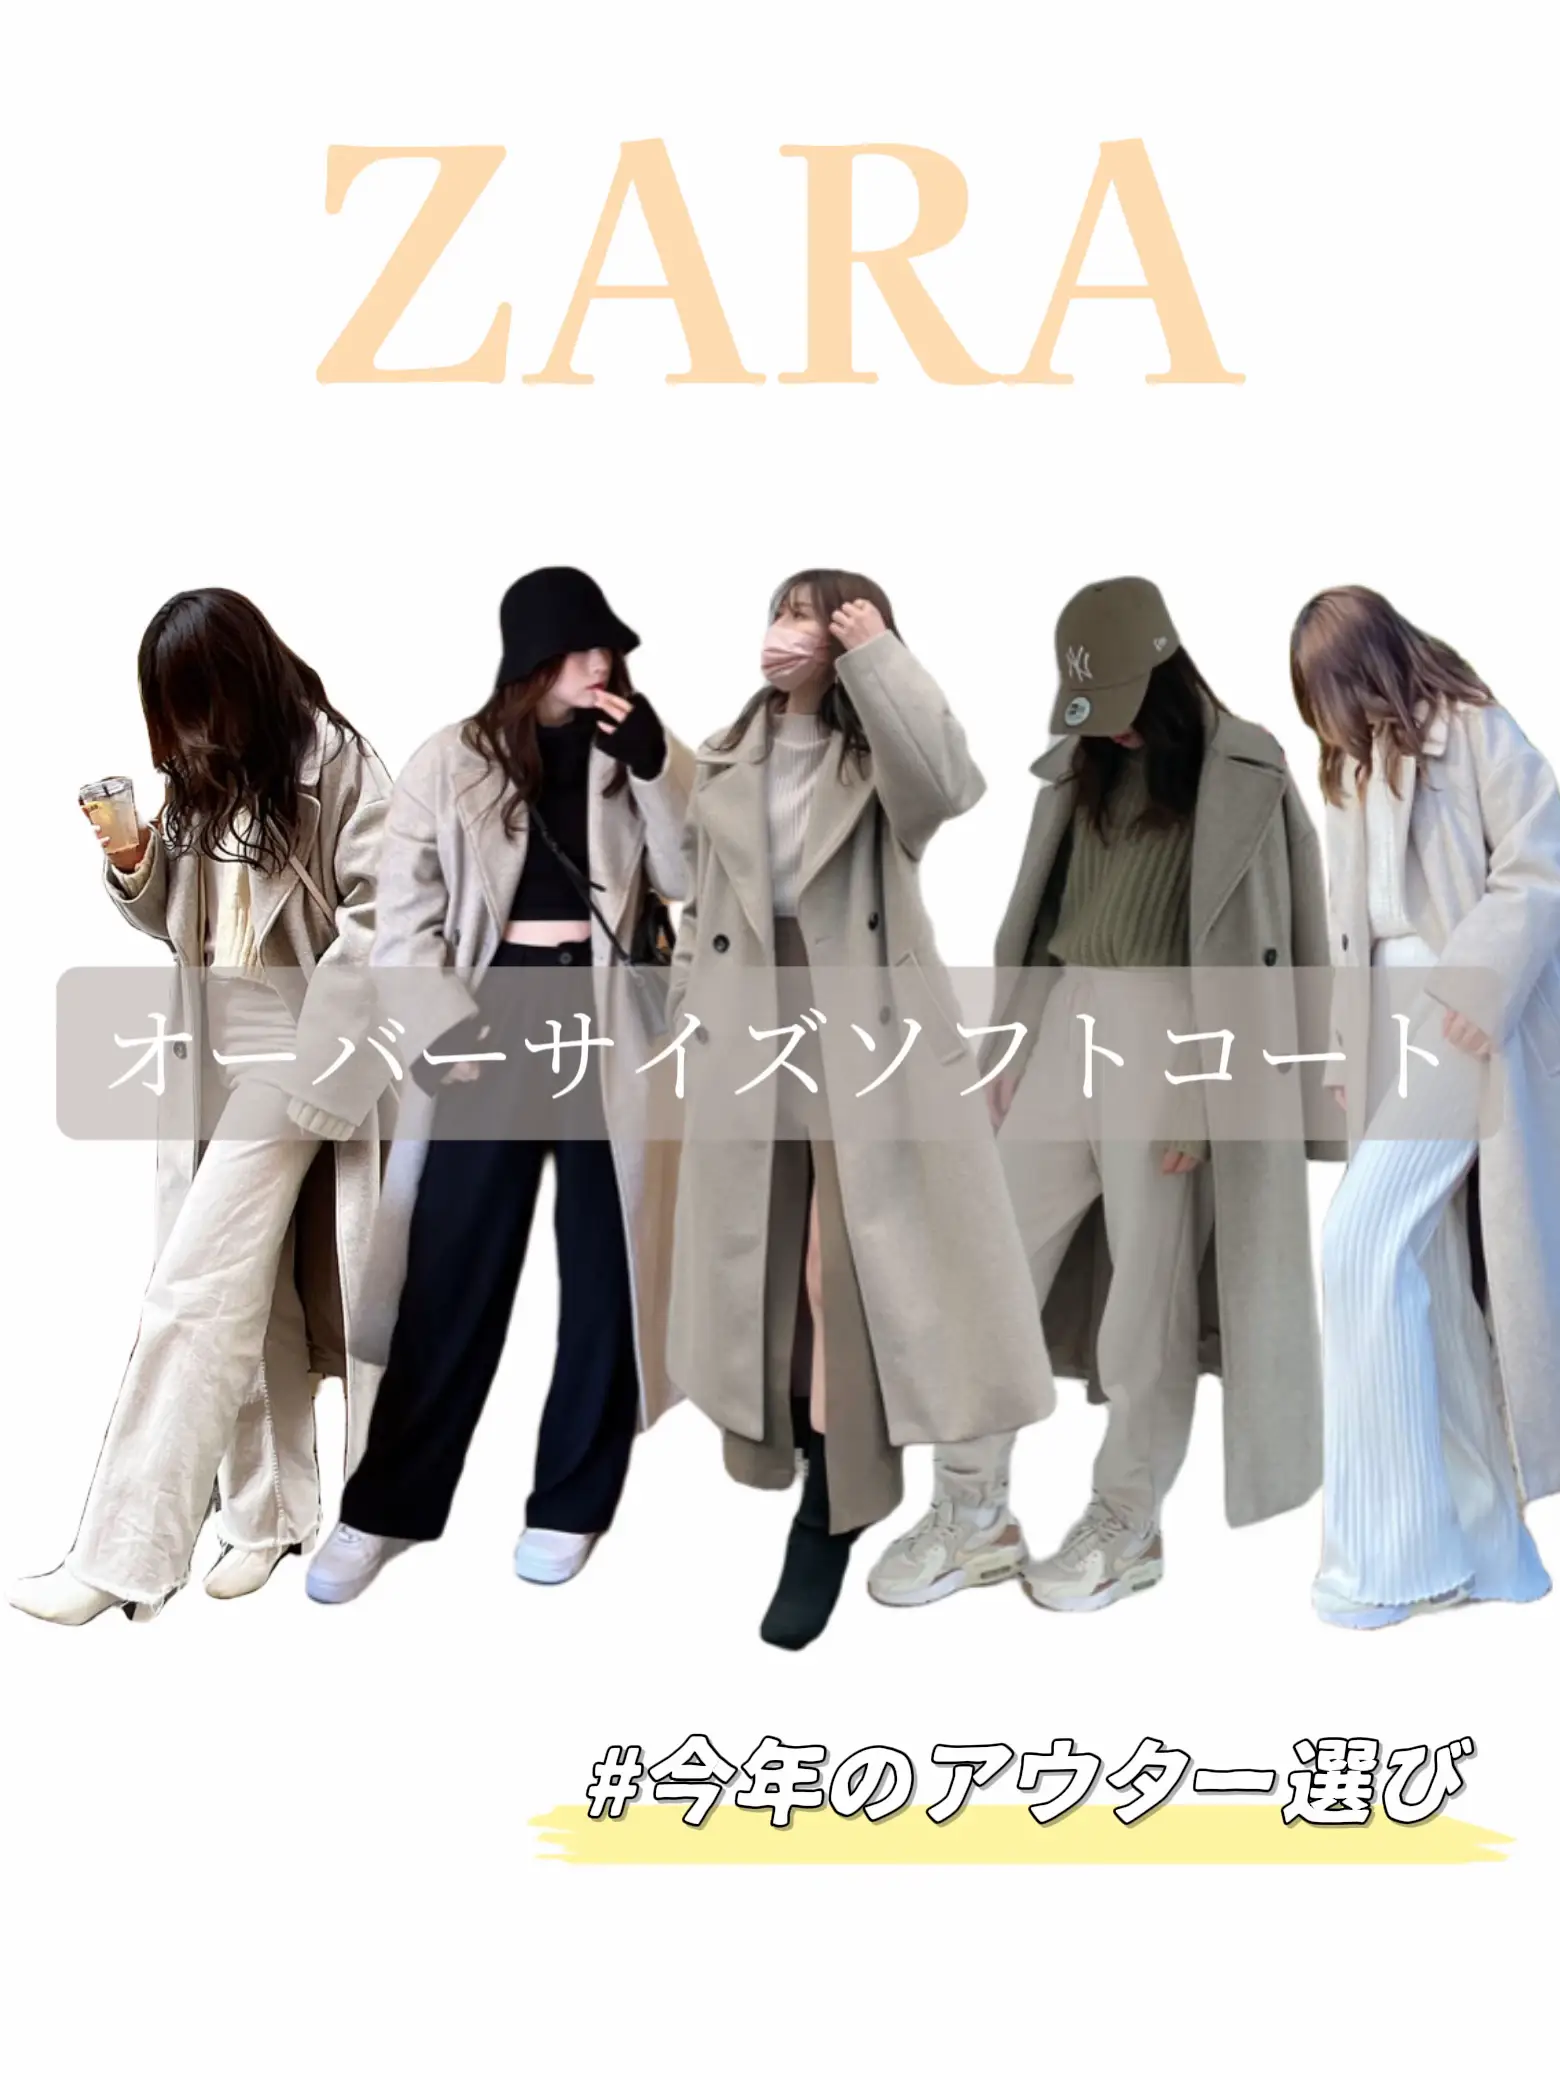 ZARA 】 This year's outerwear selection! 5 selections of wearing